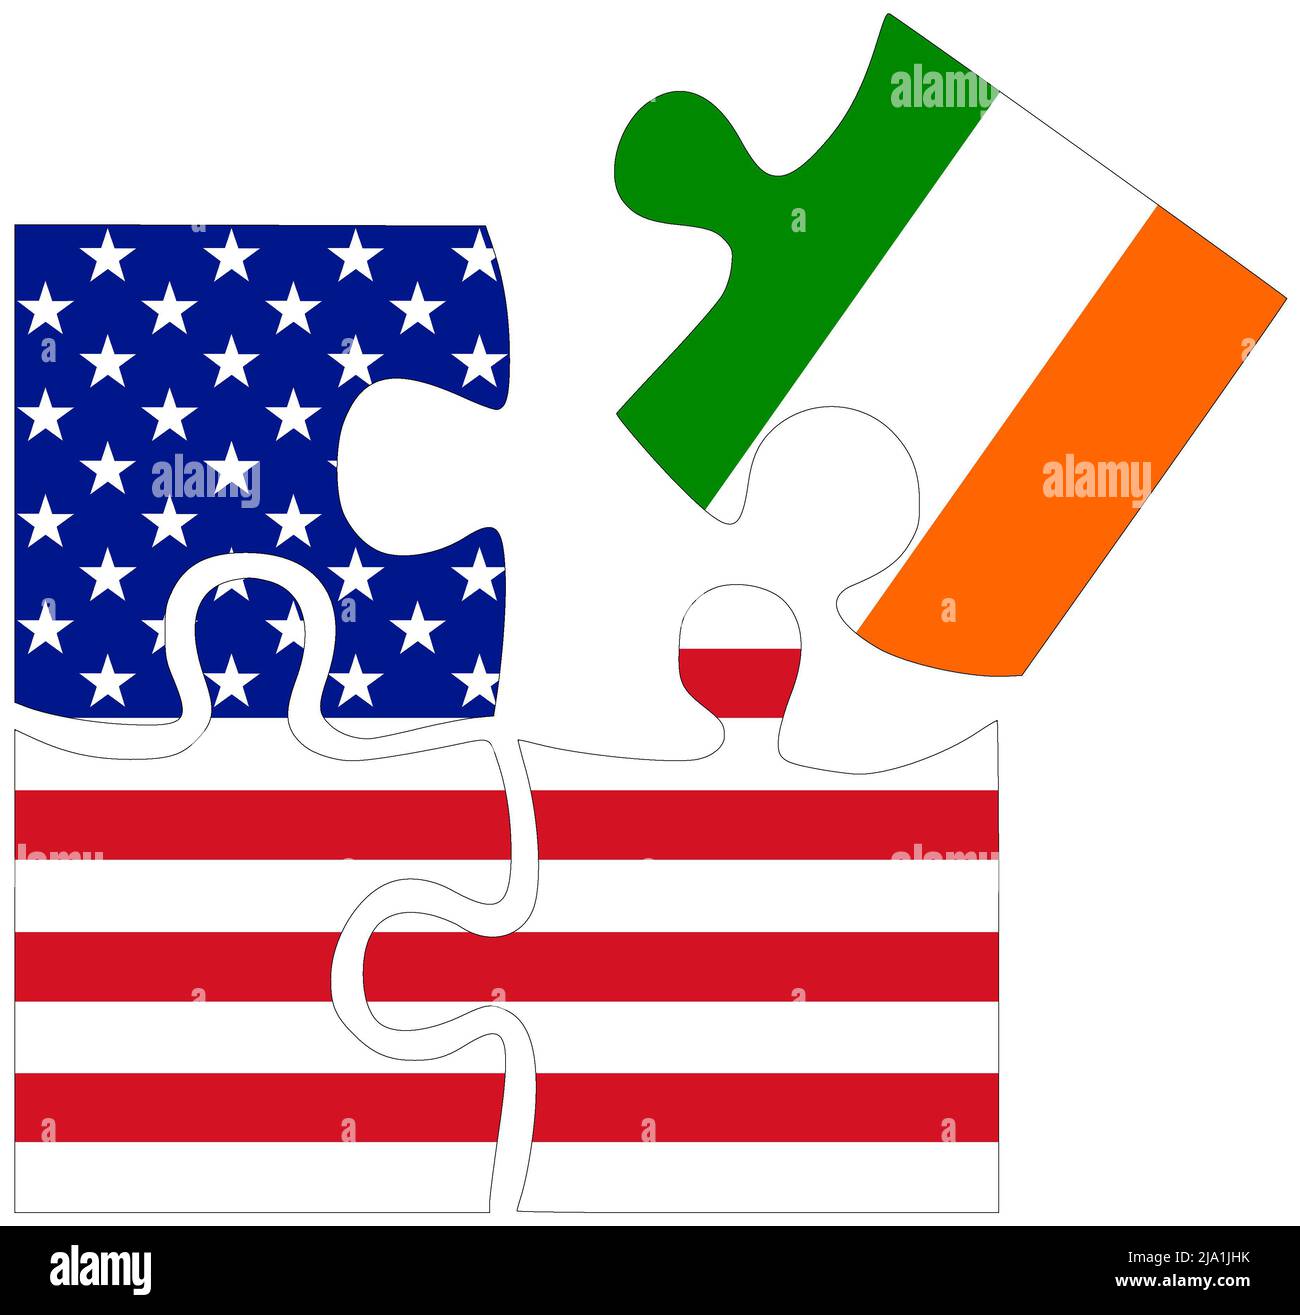 USA - Ireland : puzzle shapes with flags, symbol of agreement or friendship Stock Photo